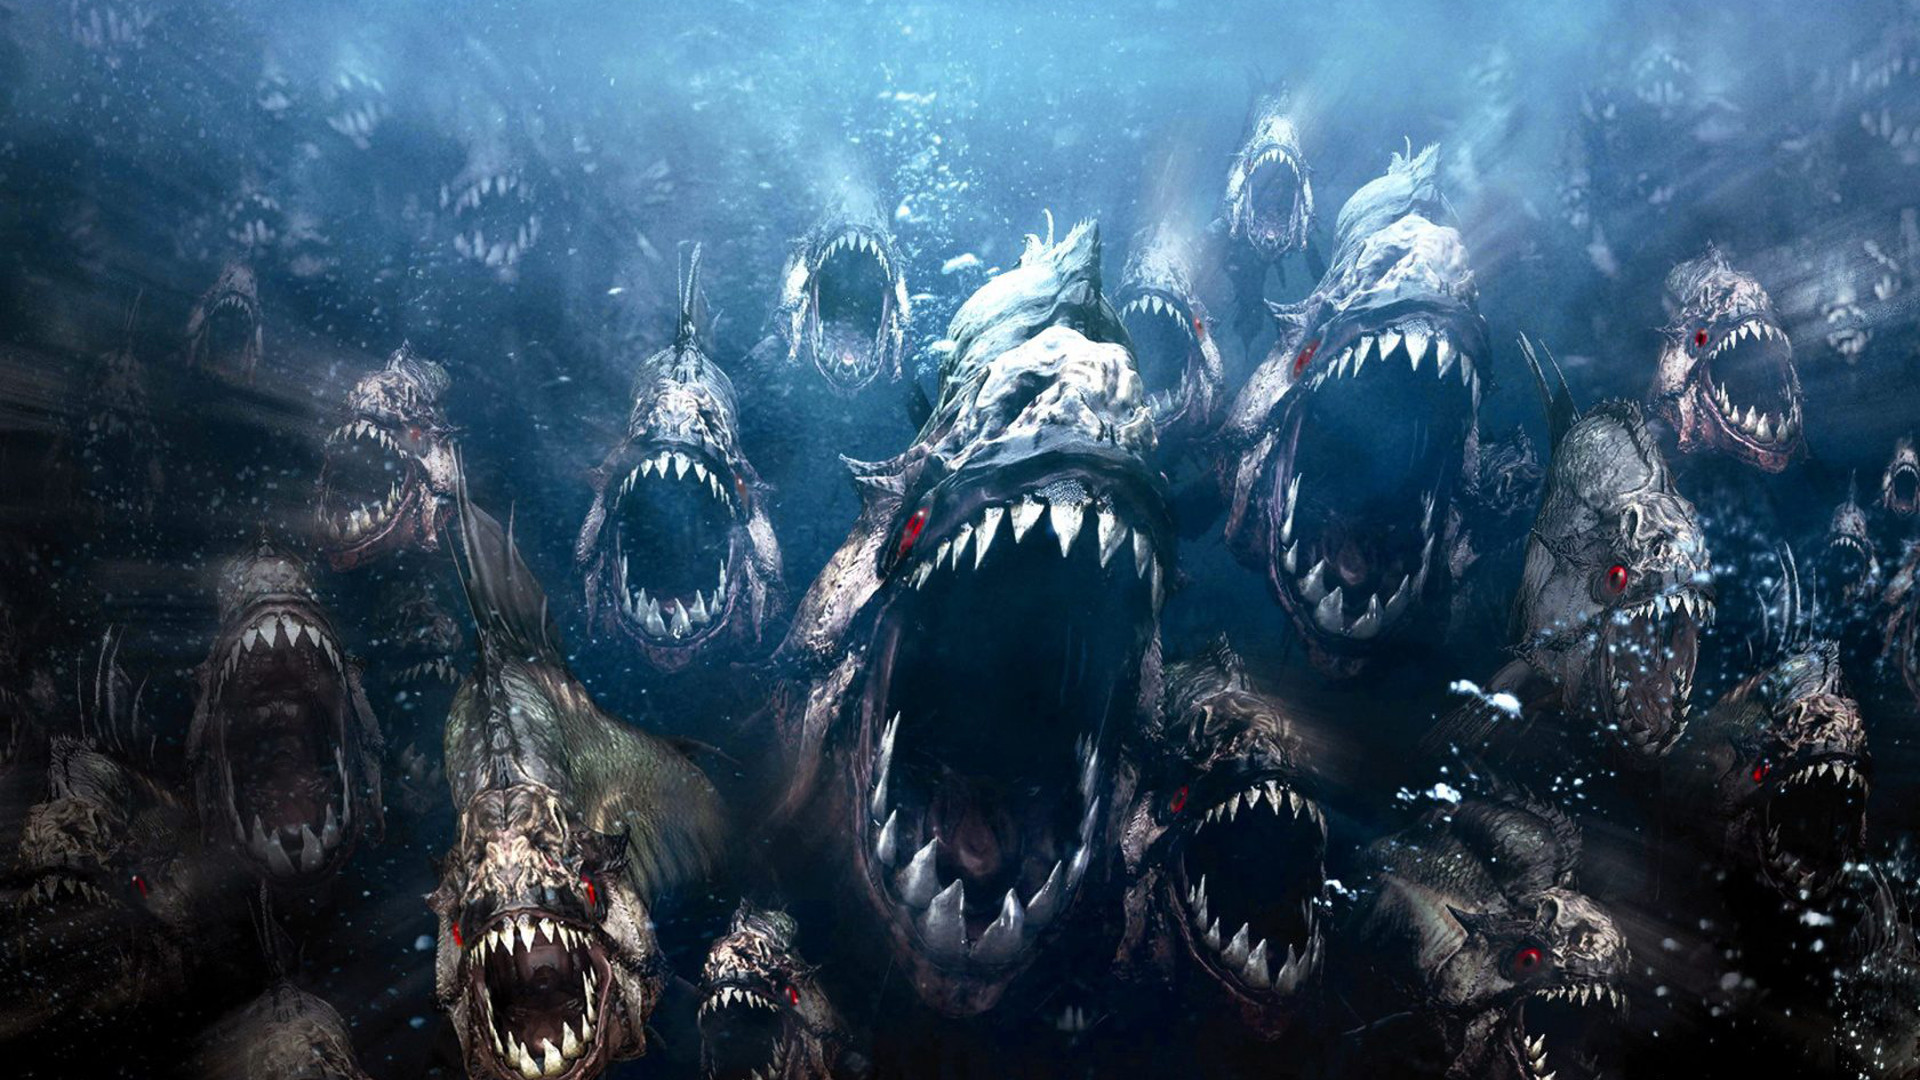 Piranha Movie Exclusive HD Wallpapers